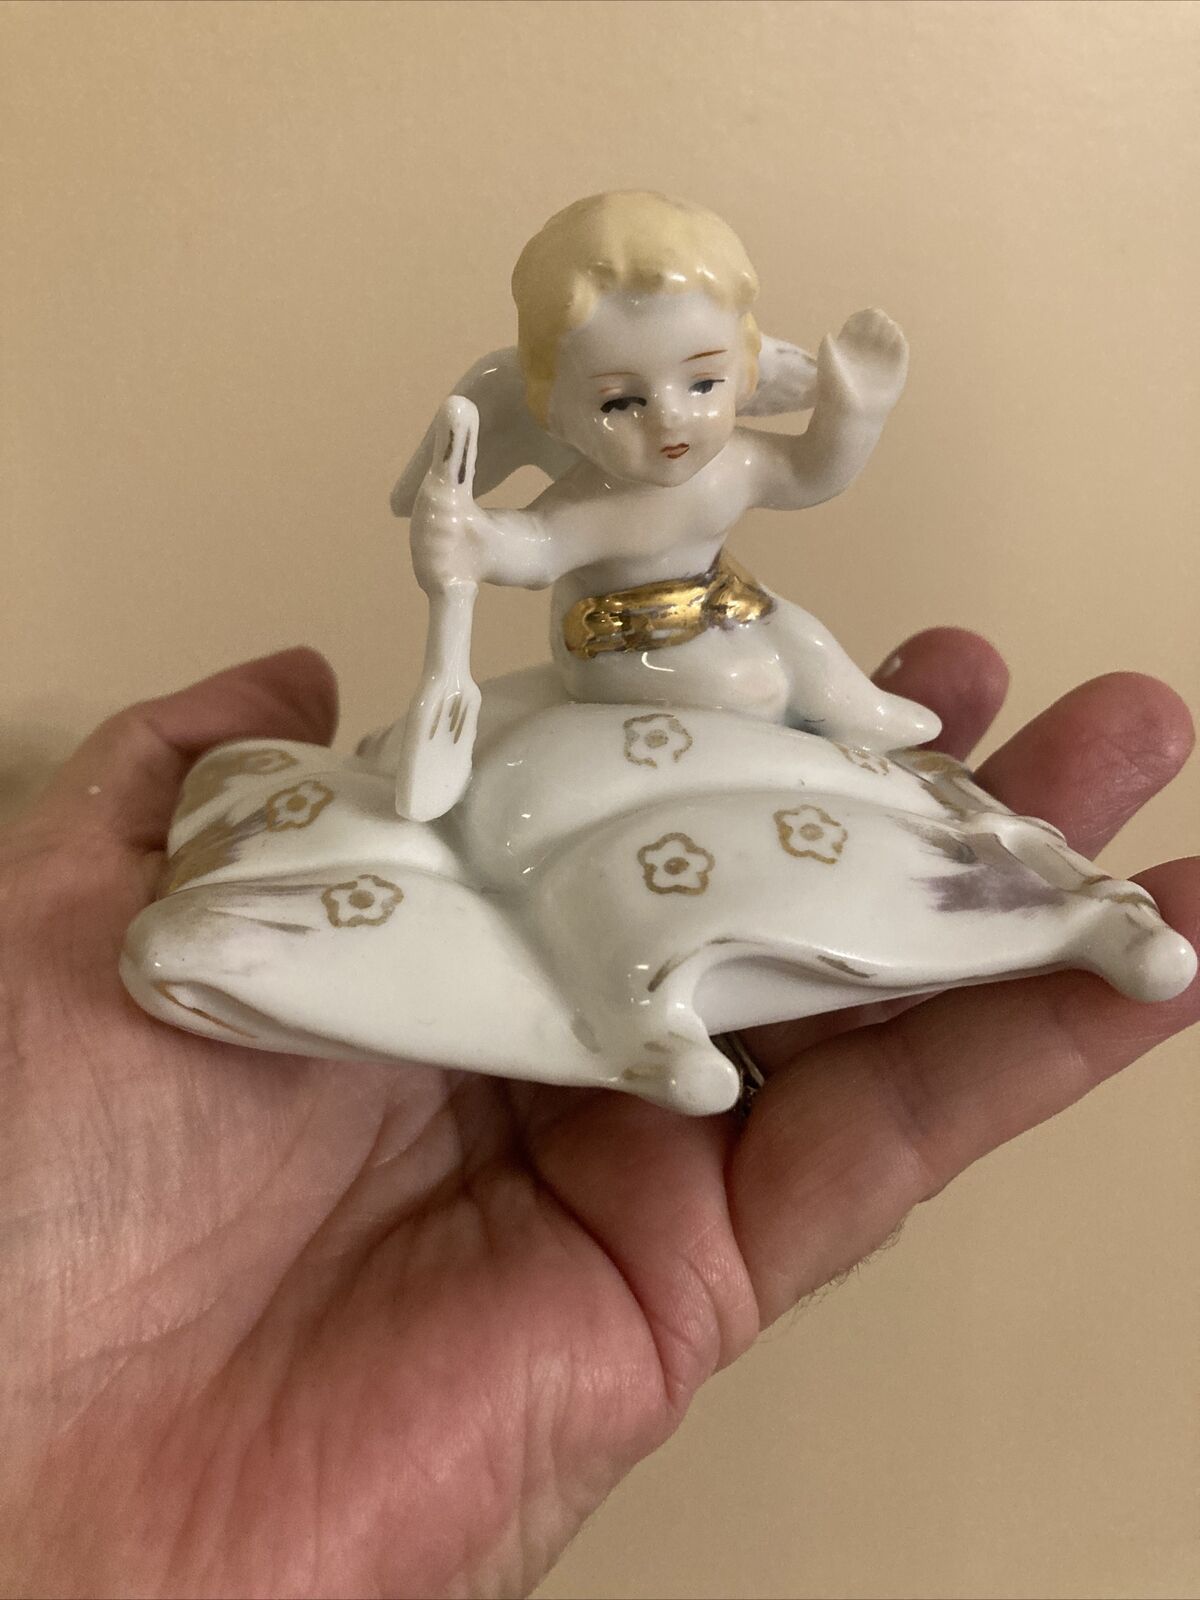 Unique Vintage Angel With Paddle With Magic Carpet (?)